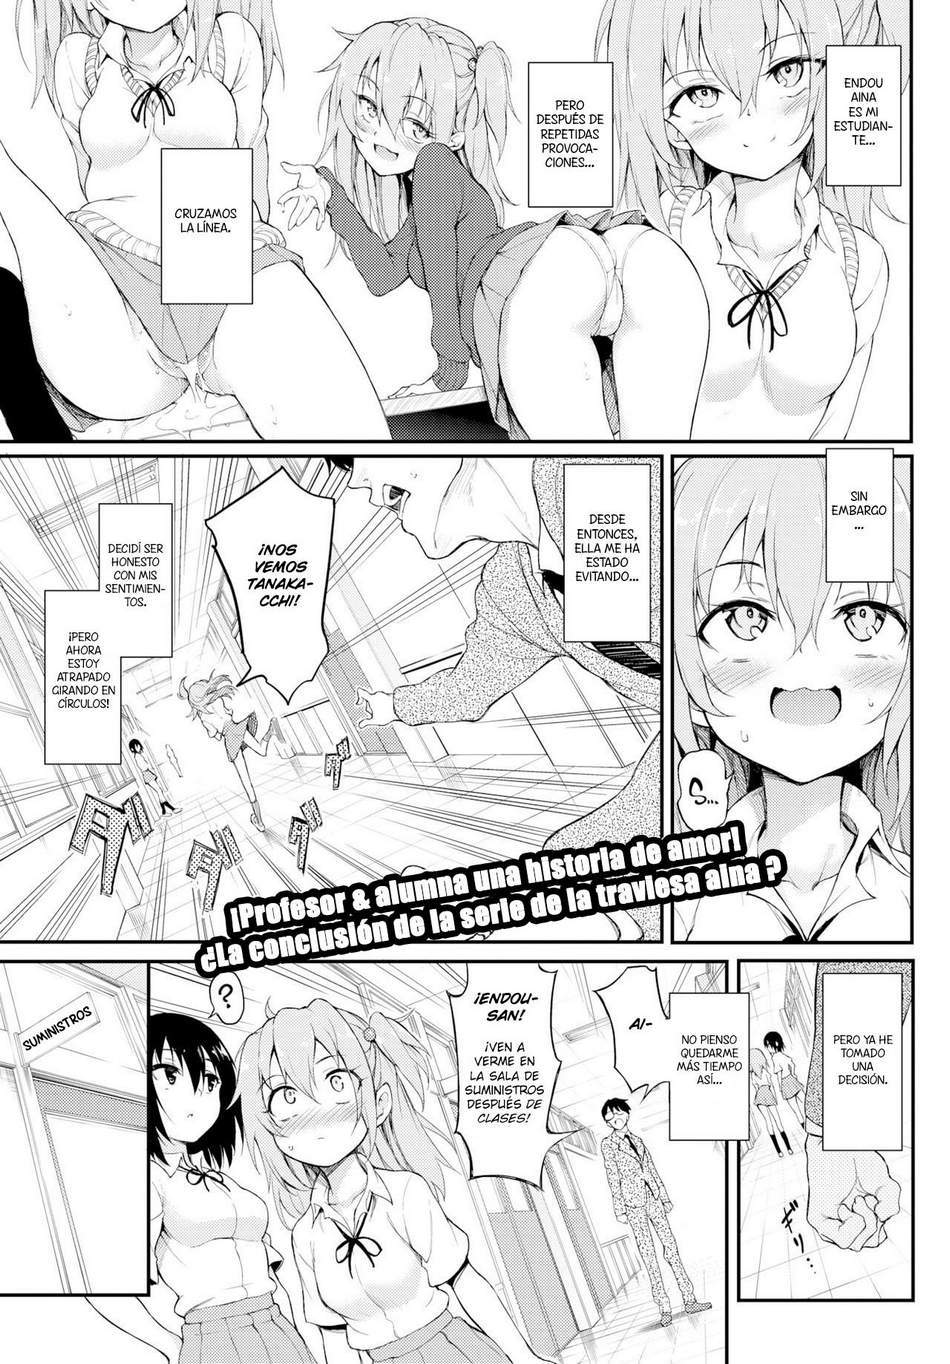 Lovely Aina-chan #3 - Page #1